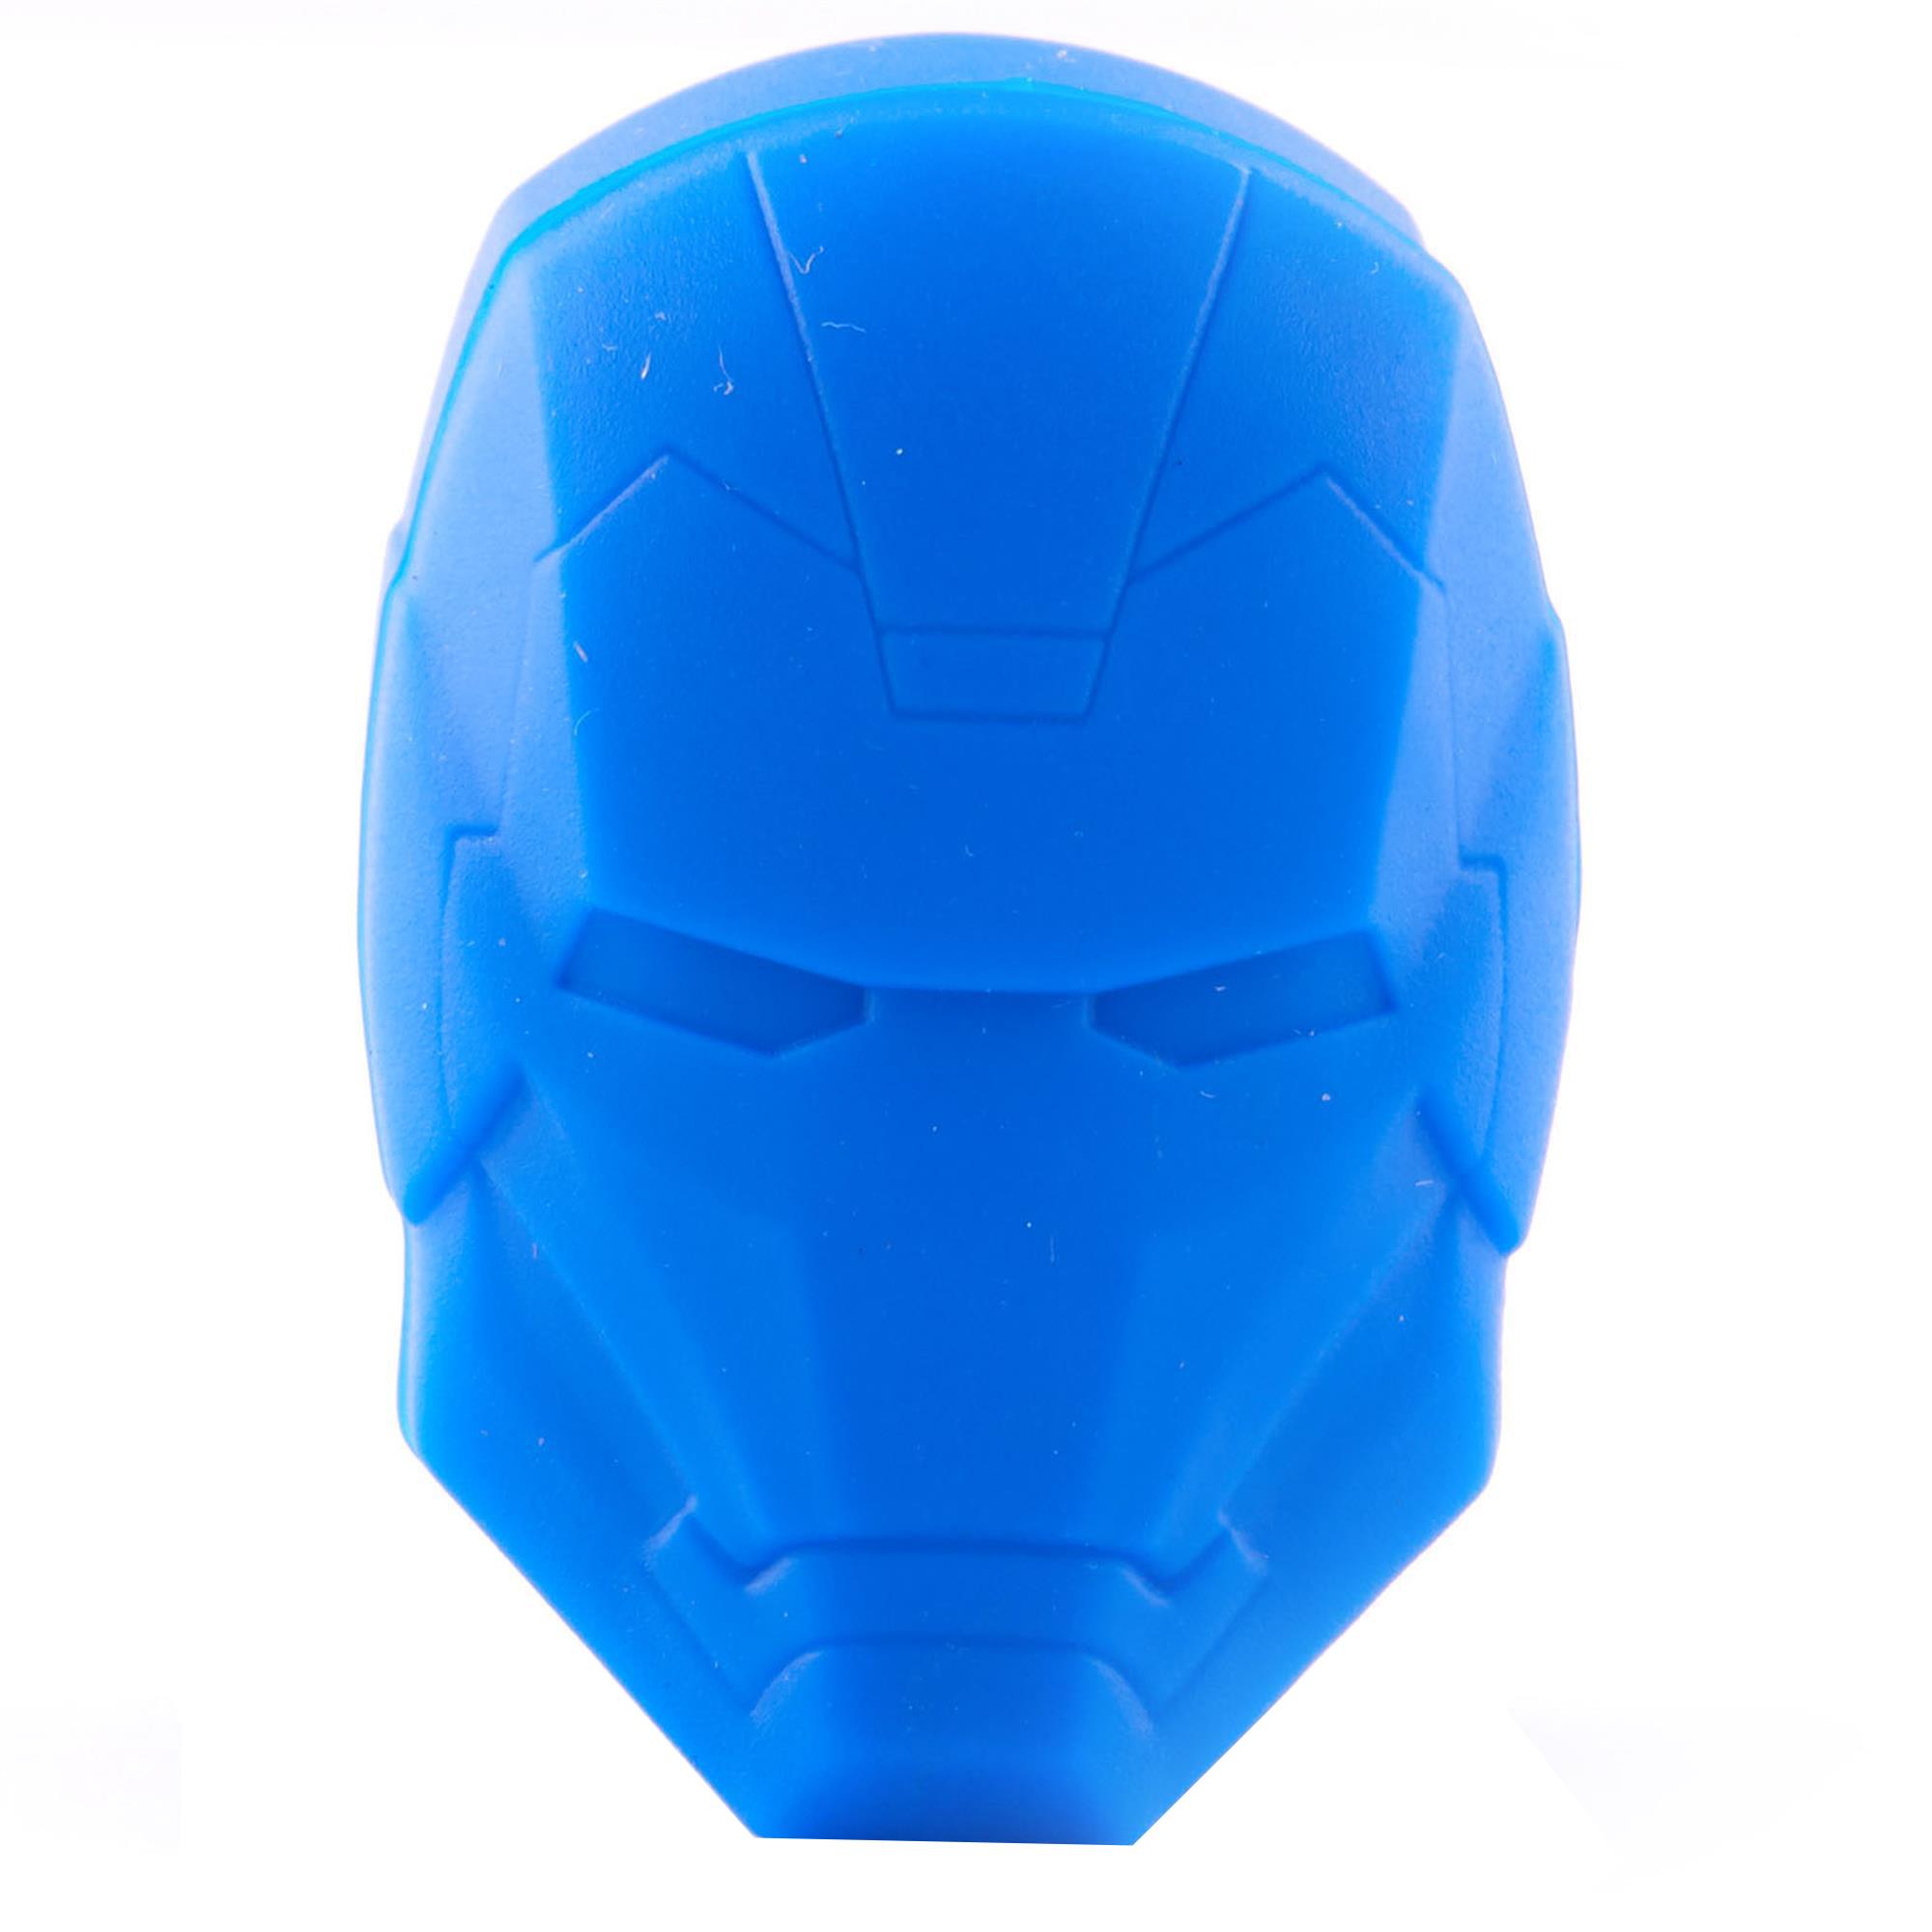 IRON MAN SILICONE CONTAINER